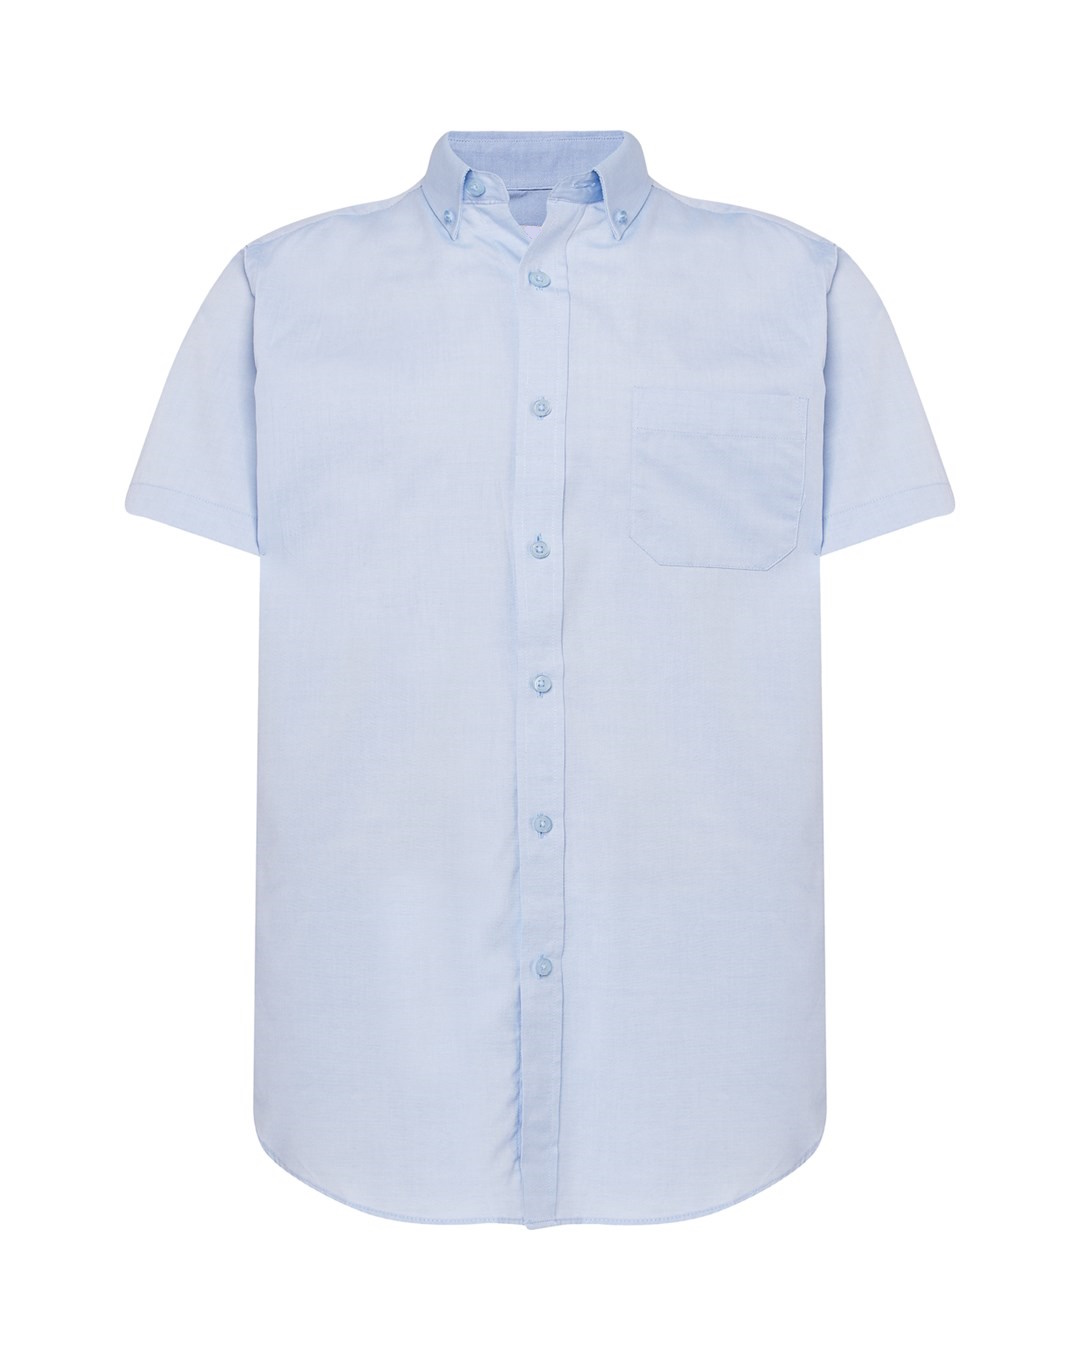 Formal shirt for men with short sleeves